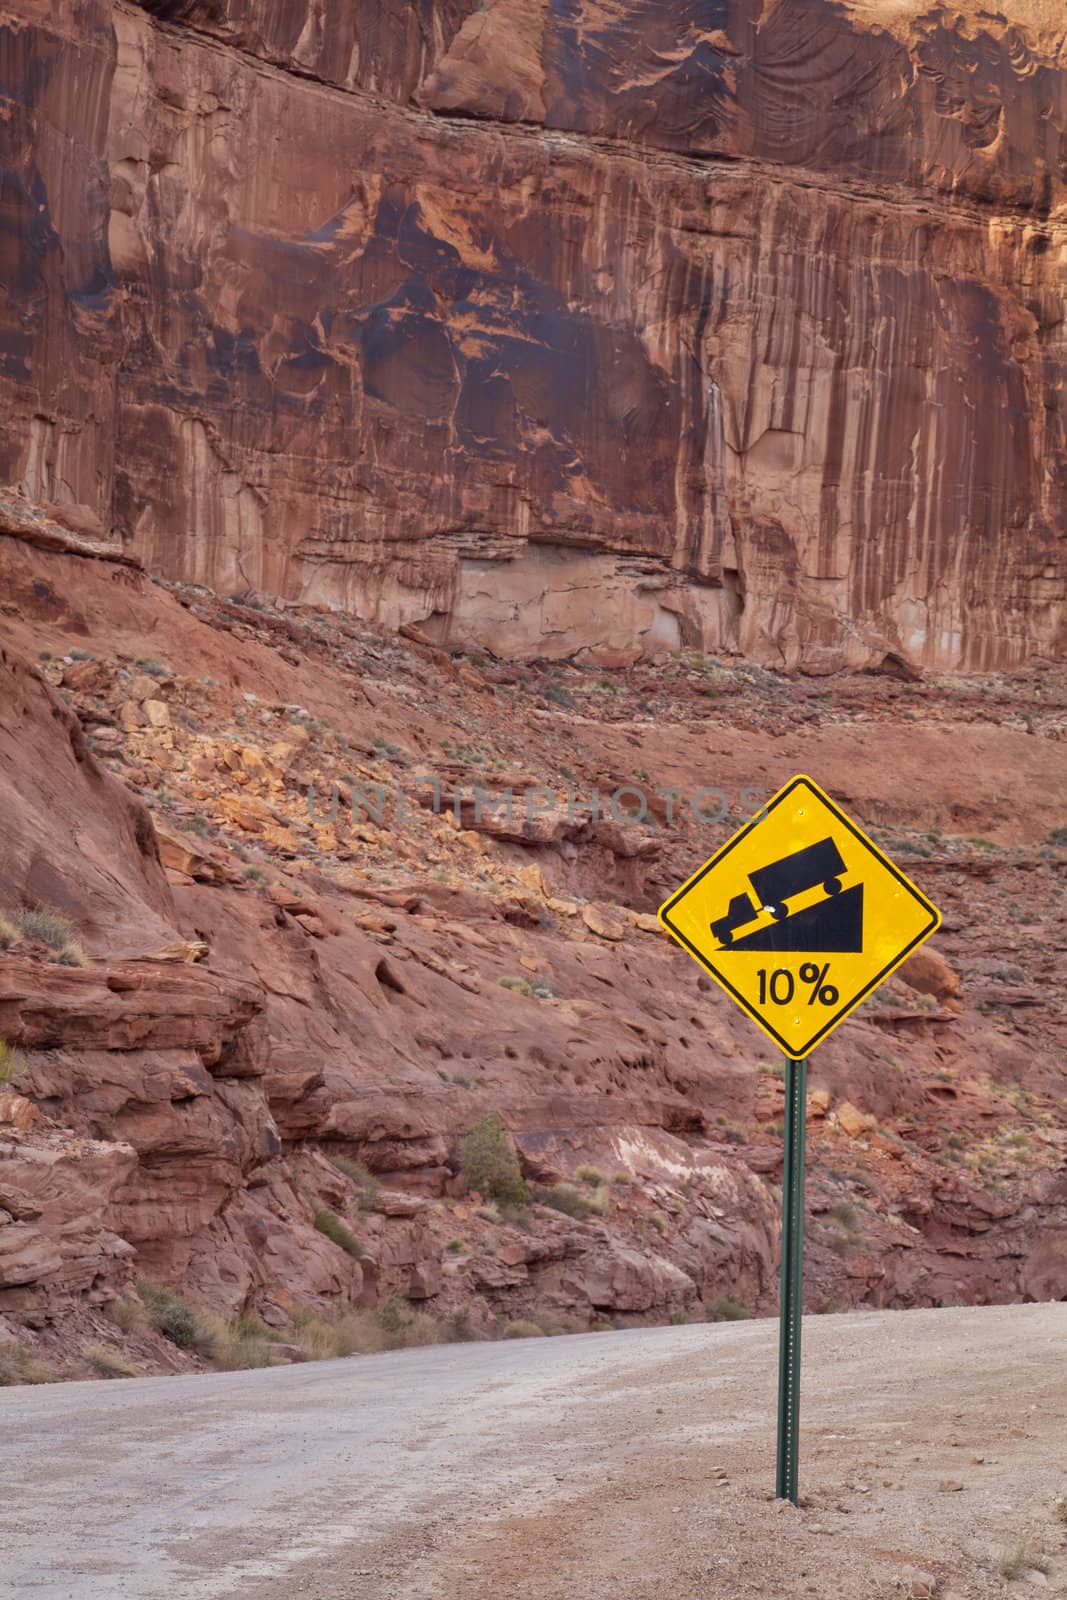 steep road with grade of 10 percent - a warning road sign in Canyonlands near Moab, Utah